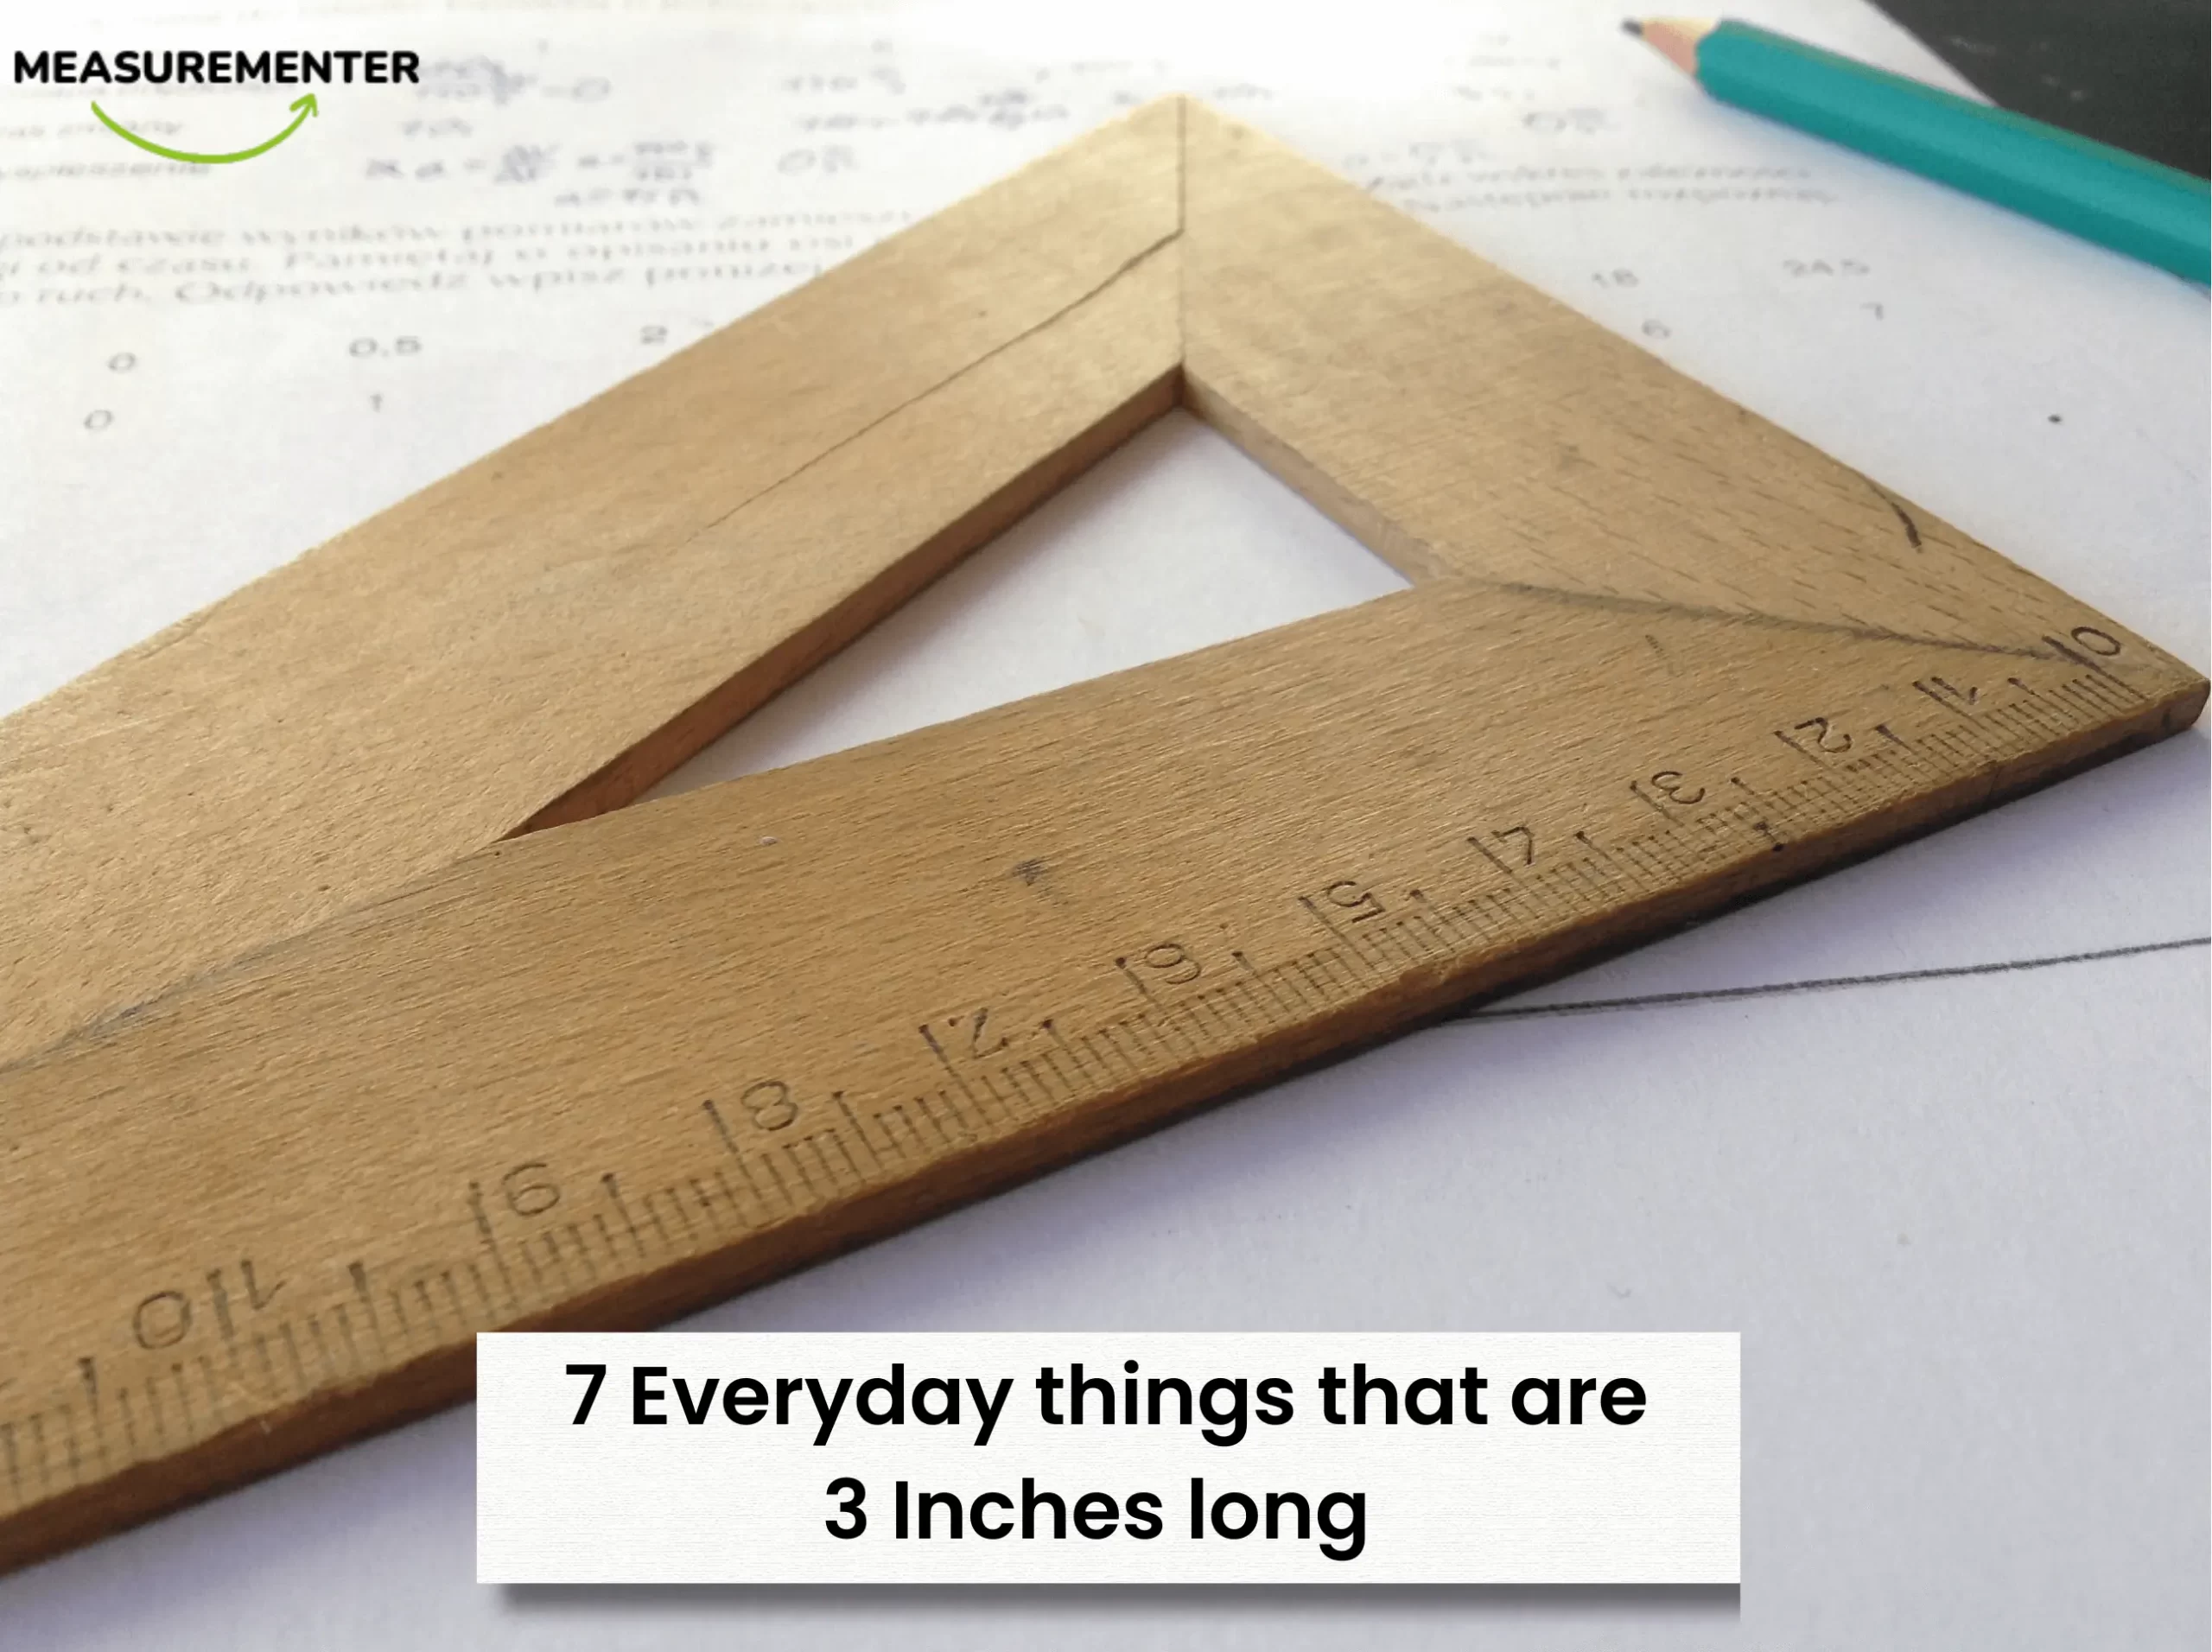 7 Everyday things that are 3 inches long